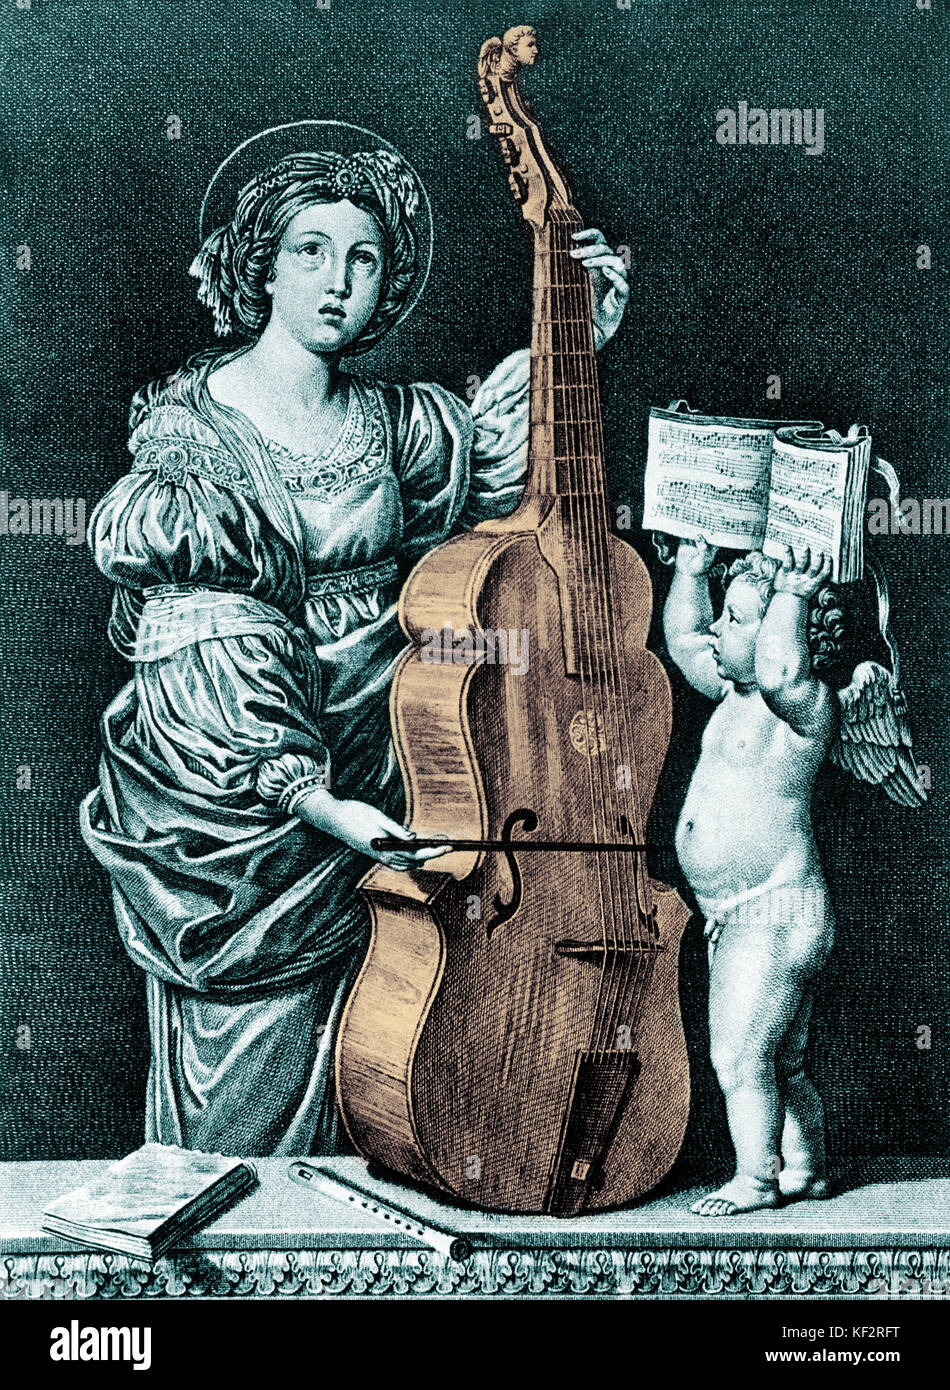 SAINT CECILIA - Playing the Viola 7 stringed viola da gamba.  Angel holding music part-book. Recorder on table. 17th century Painting.  Baroque Roman Martyr, Patron Saint of Music Stock Photo